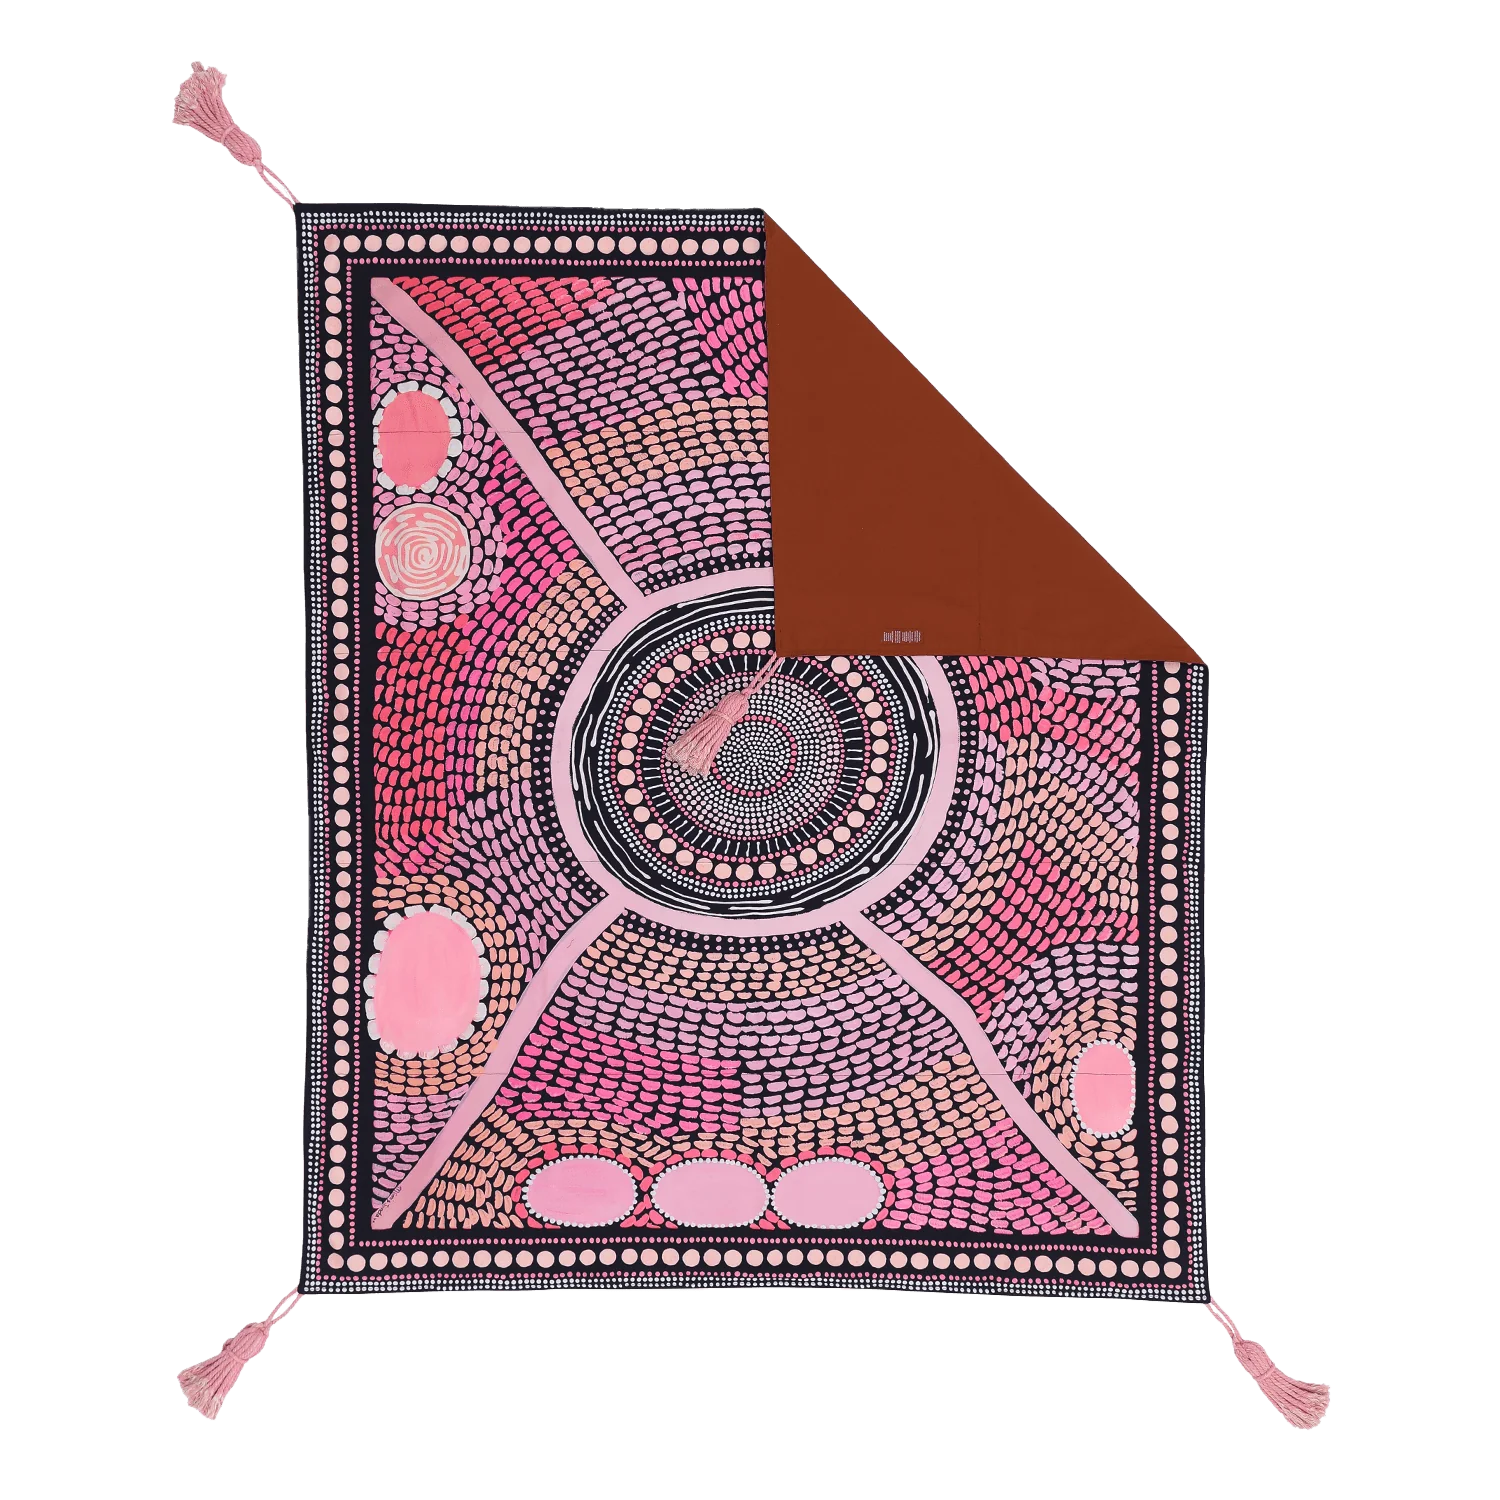 The first of our Artists Series, the Miinggi Jaanymili Picnic Rug features Indigenous artists duo Miimi and Jiinda’s artwork. The symbol in the middle represents a meeting place where people come together and connect. The circles around the outside are neighbouring tribes, friends and family that journey along the pathways, meeting in the middle to share stories, culture, food and celebrations.